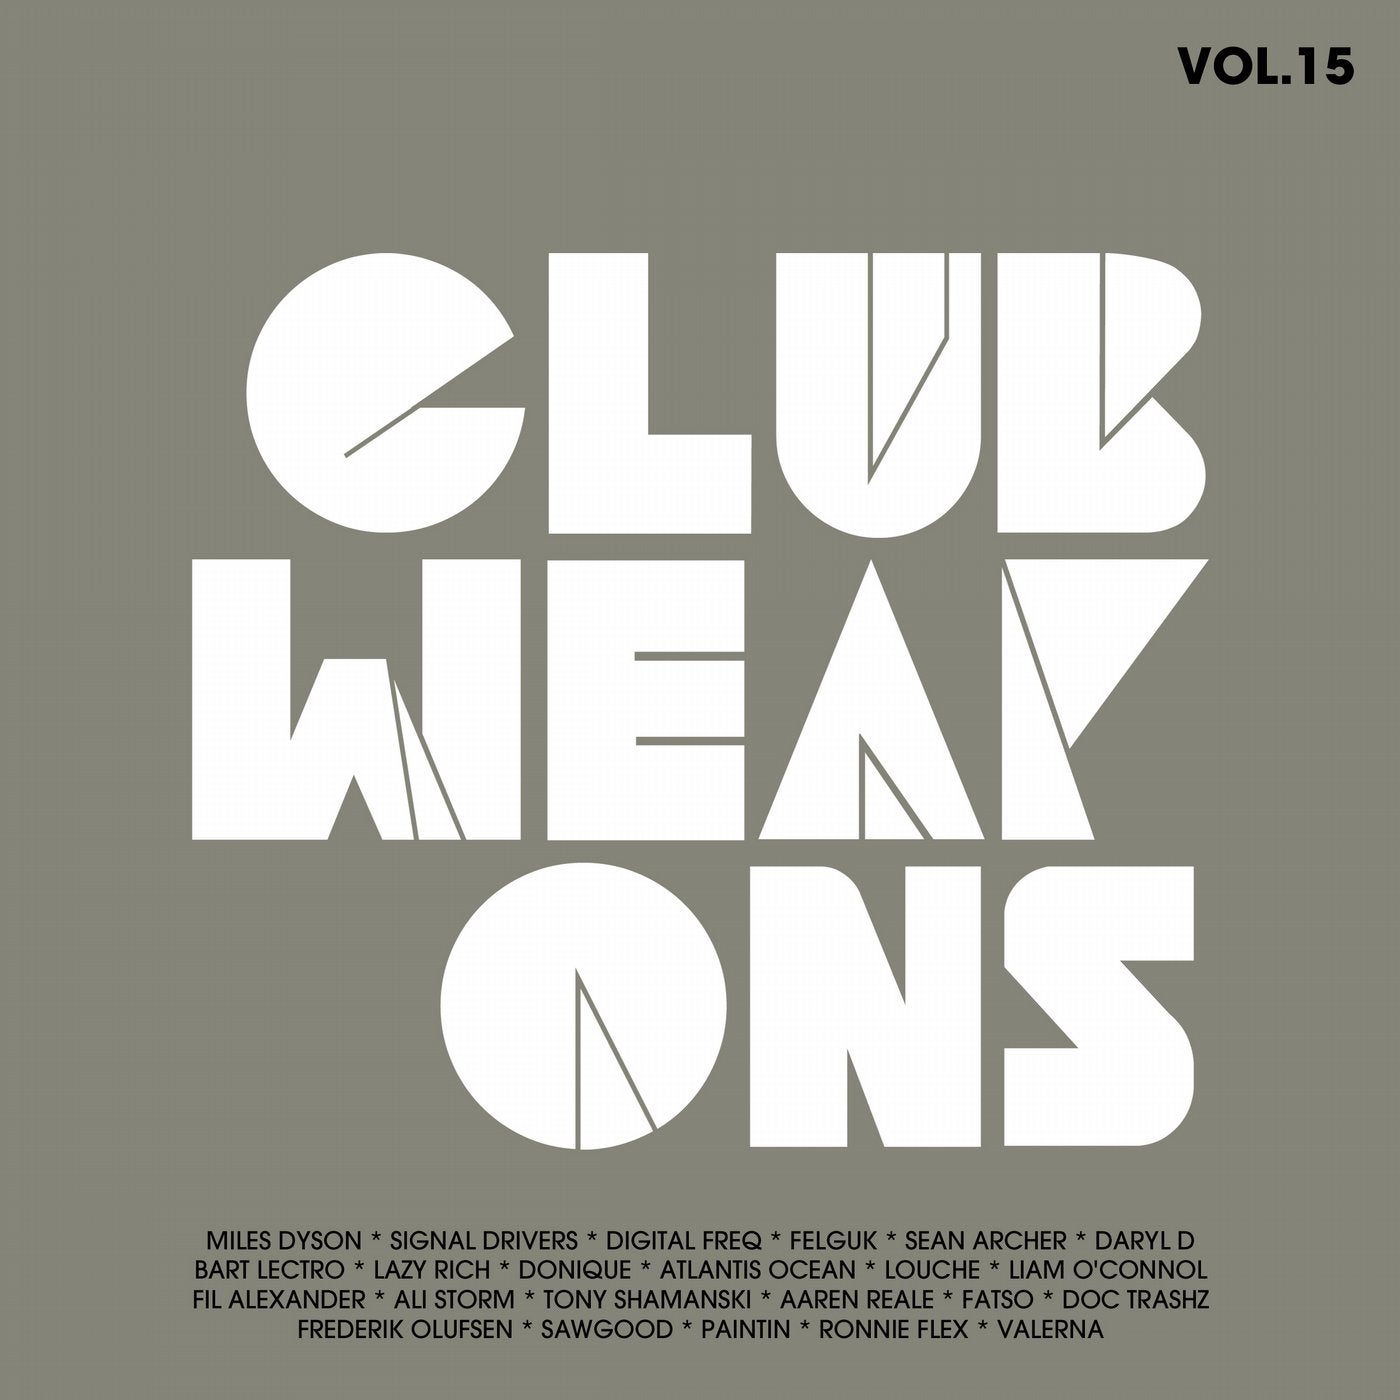 Club Weapons Vol.15 Electro House